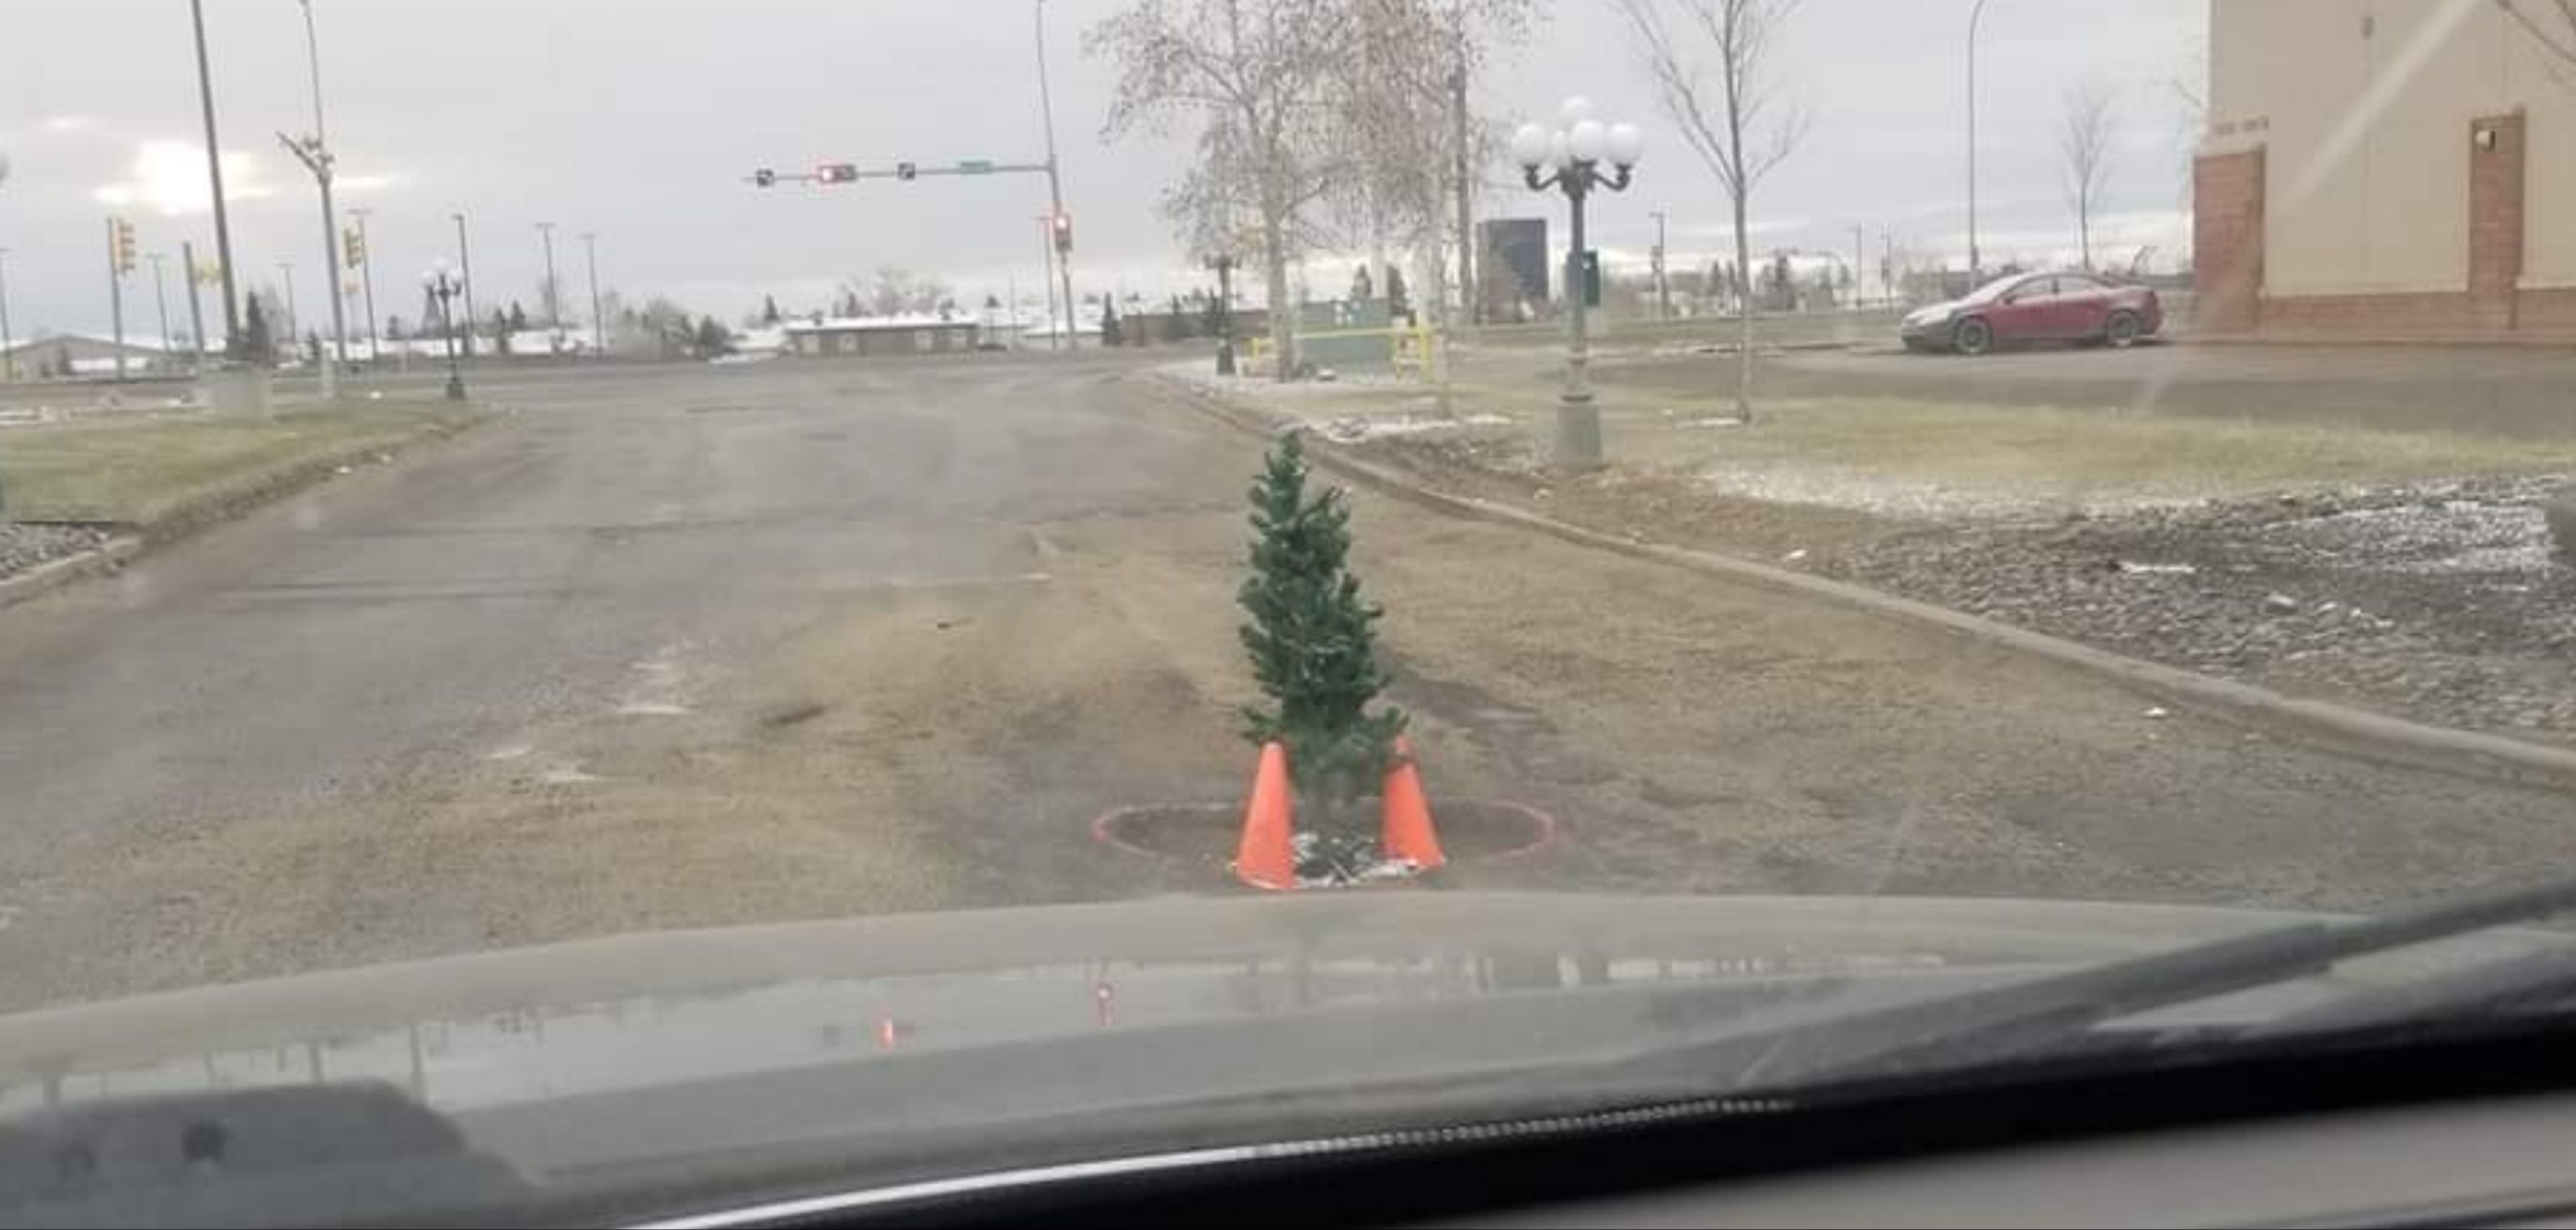 Someone in my town planted a tree in a notoriously big pot hole